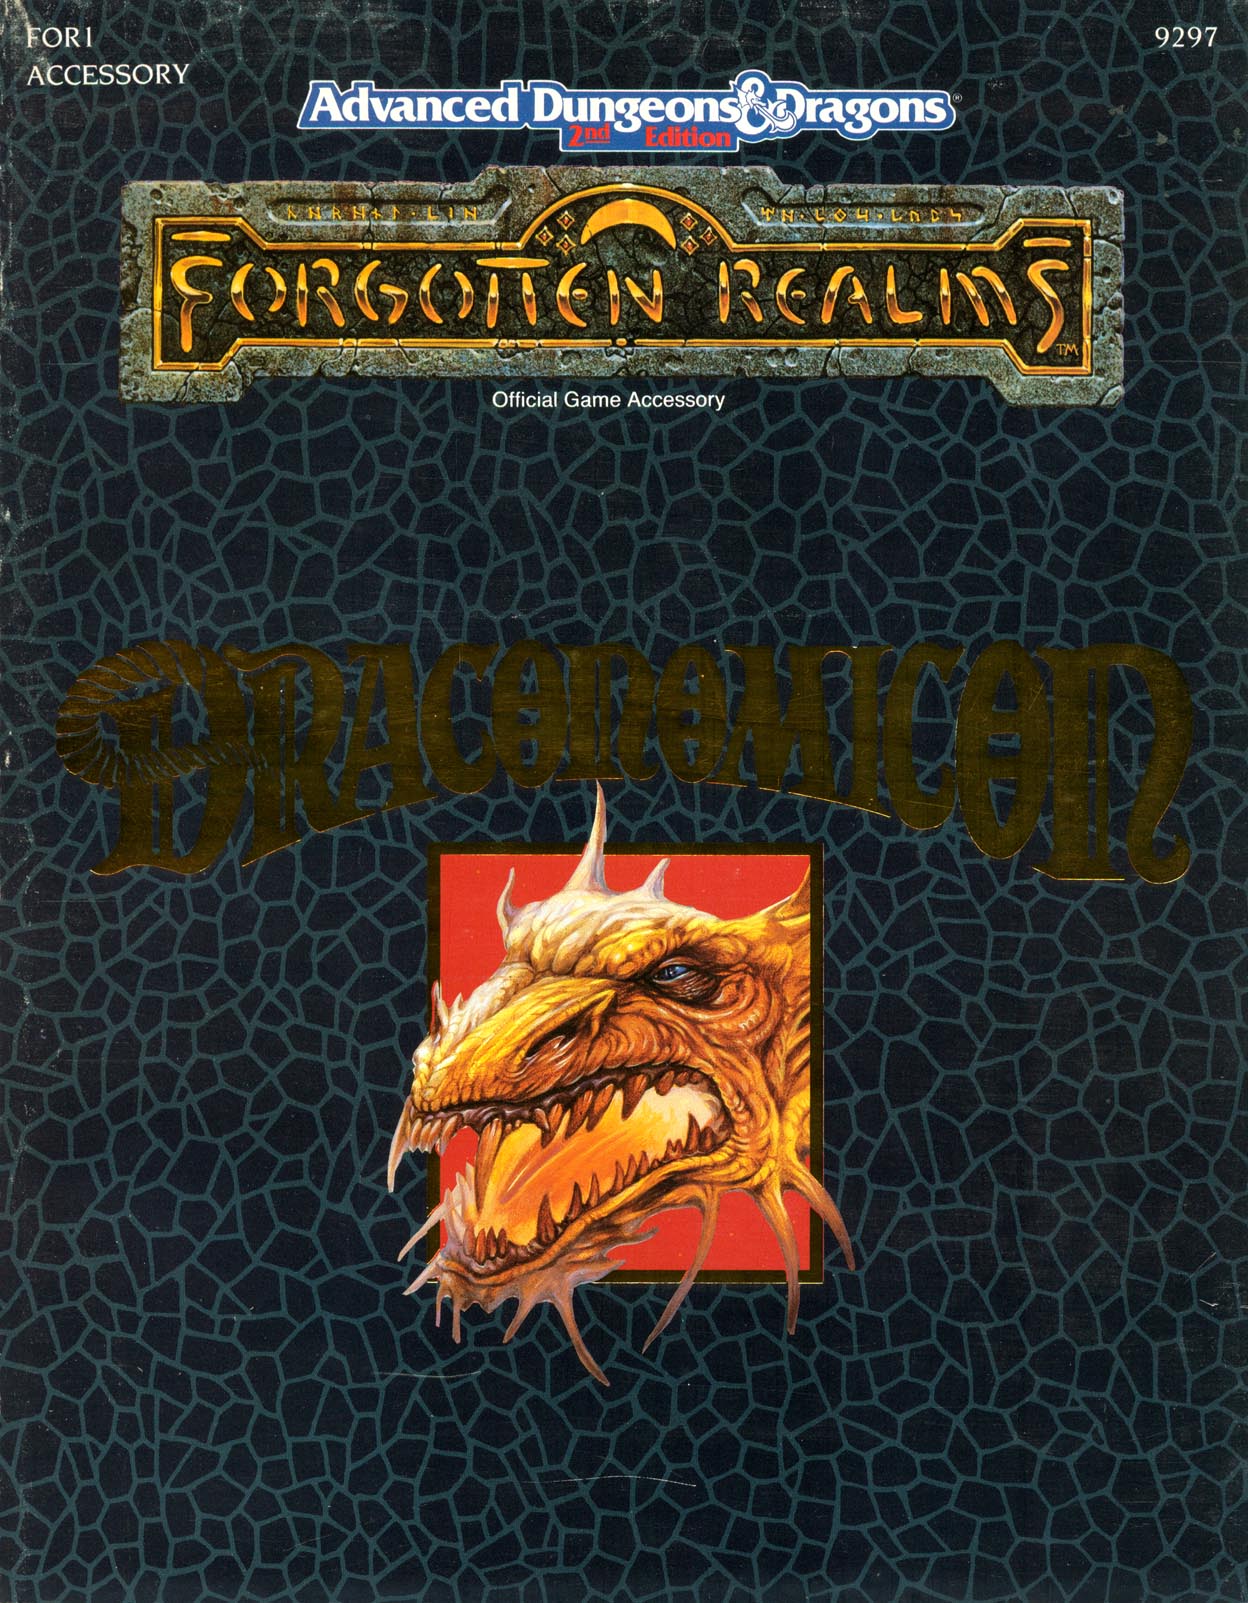 Advanced Dungeons & Dragons: Forgotten Realms: The Code of the Harpers 9390  FOR4